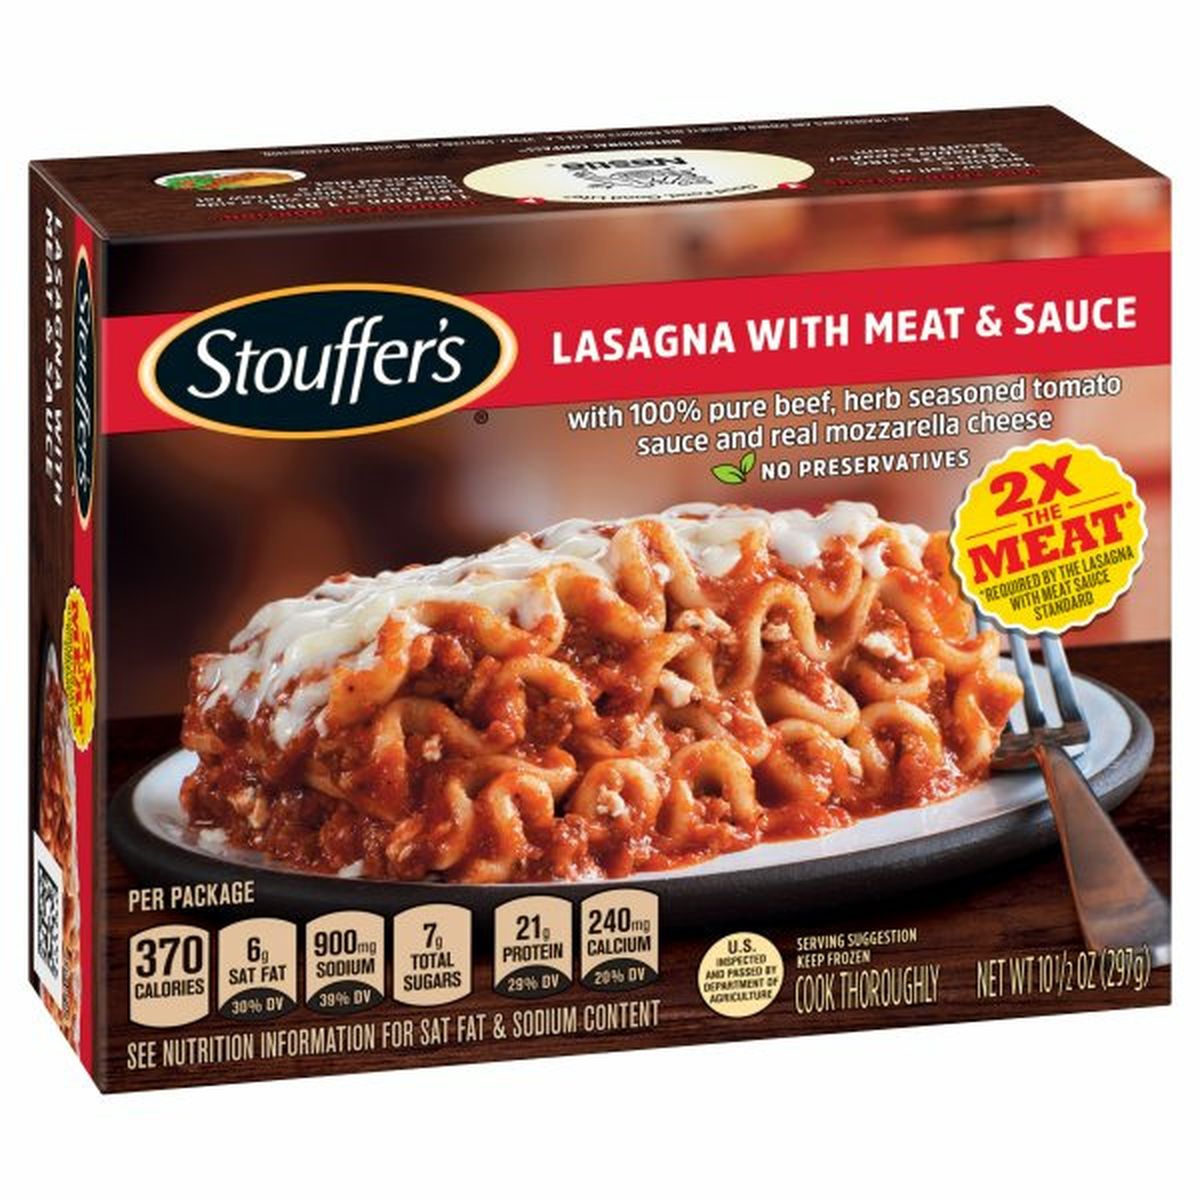 Calories in Stouffer's Lasagna with Meat & Sauce, Frozen Meal